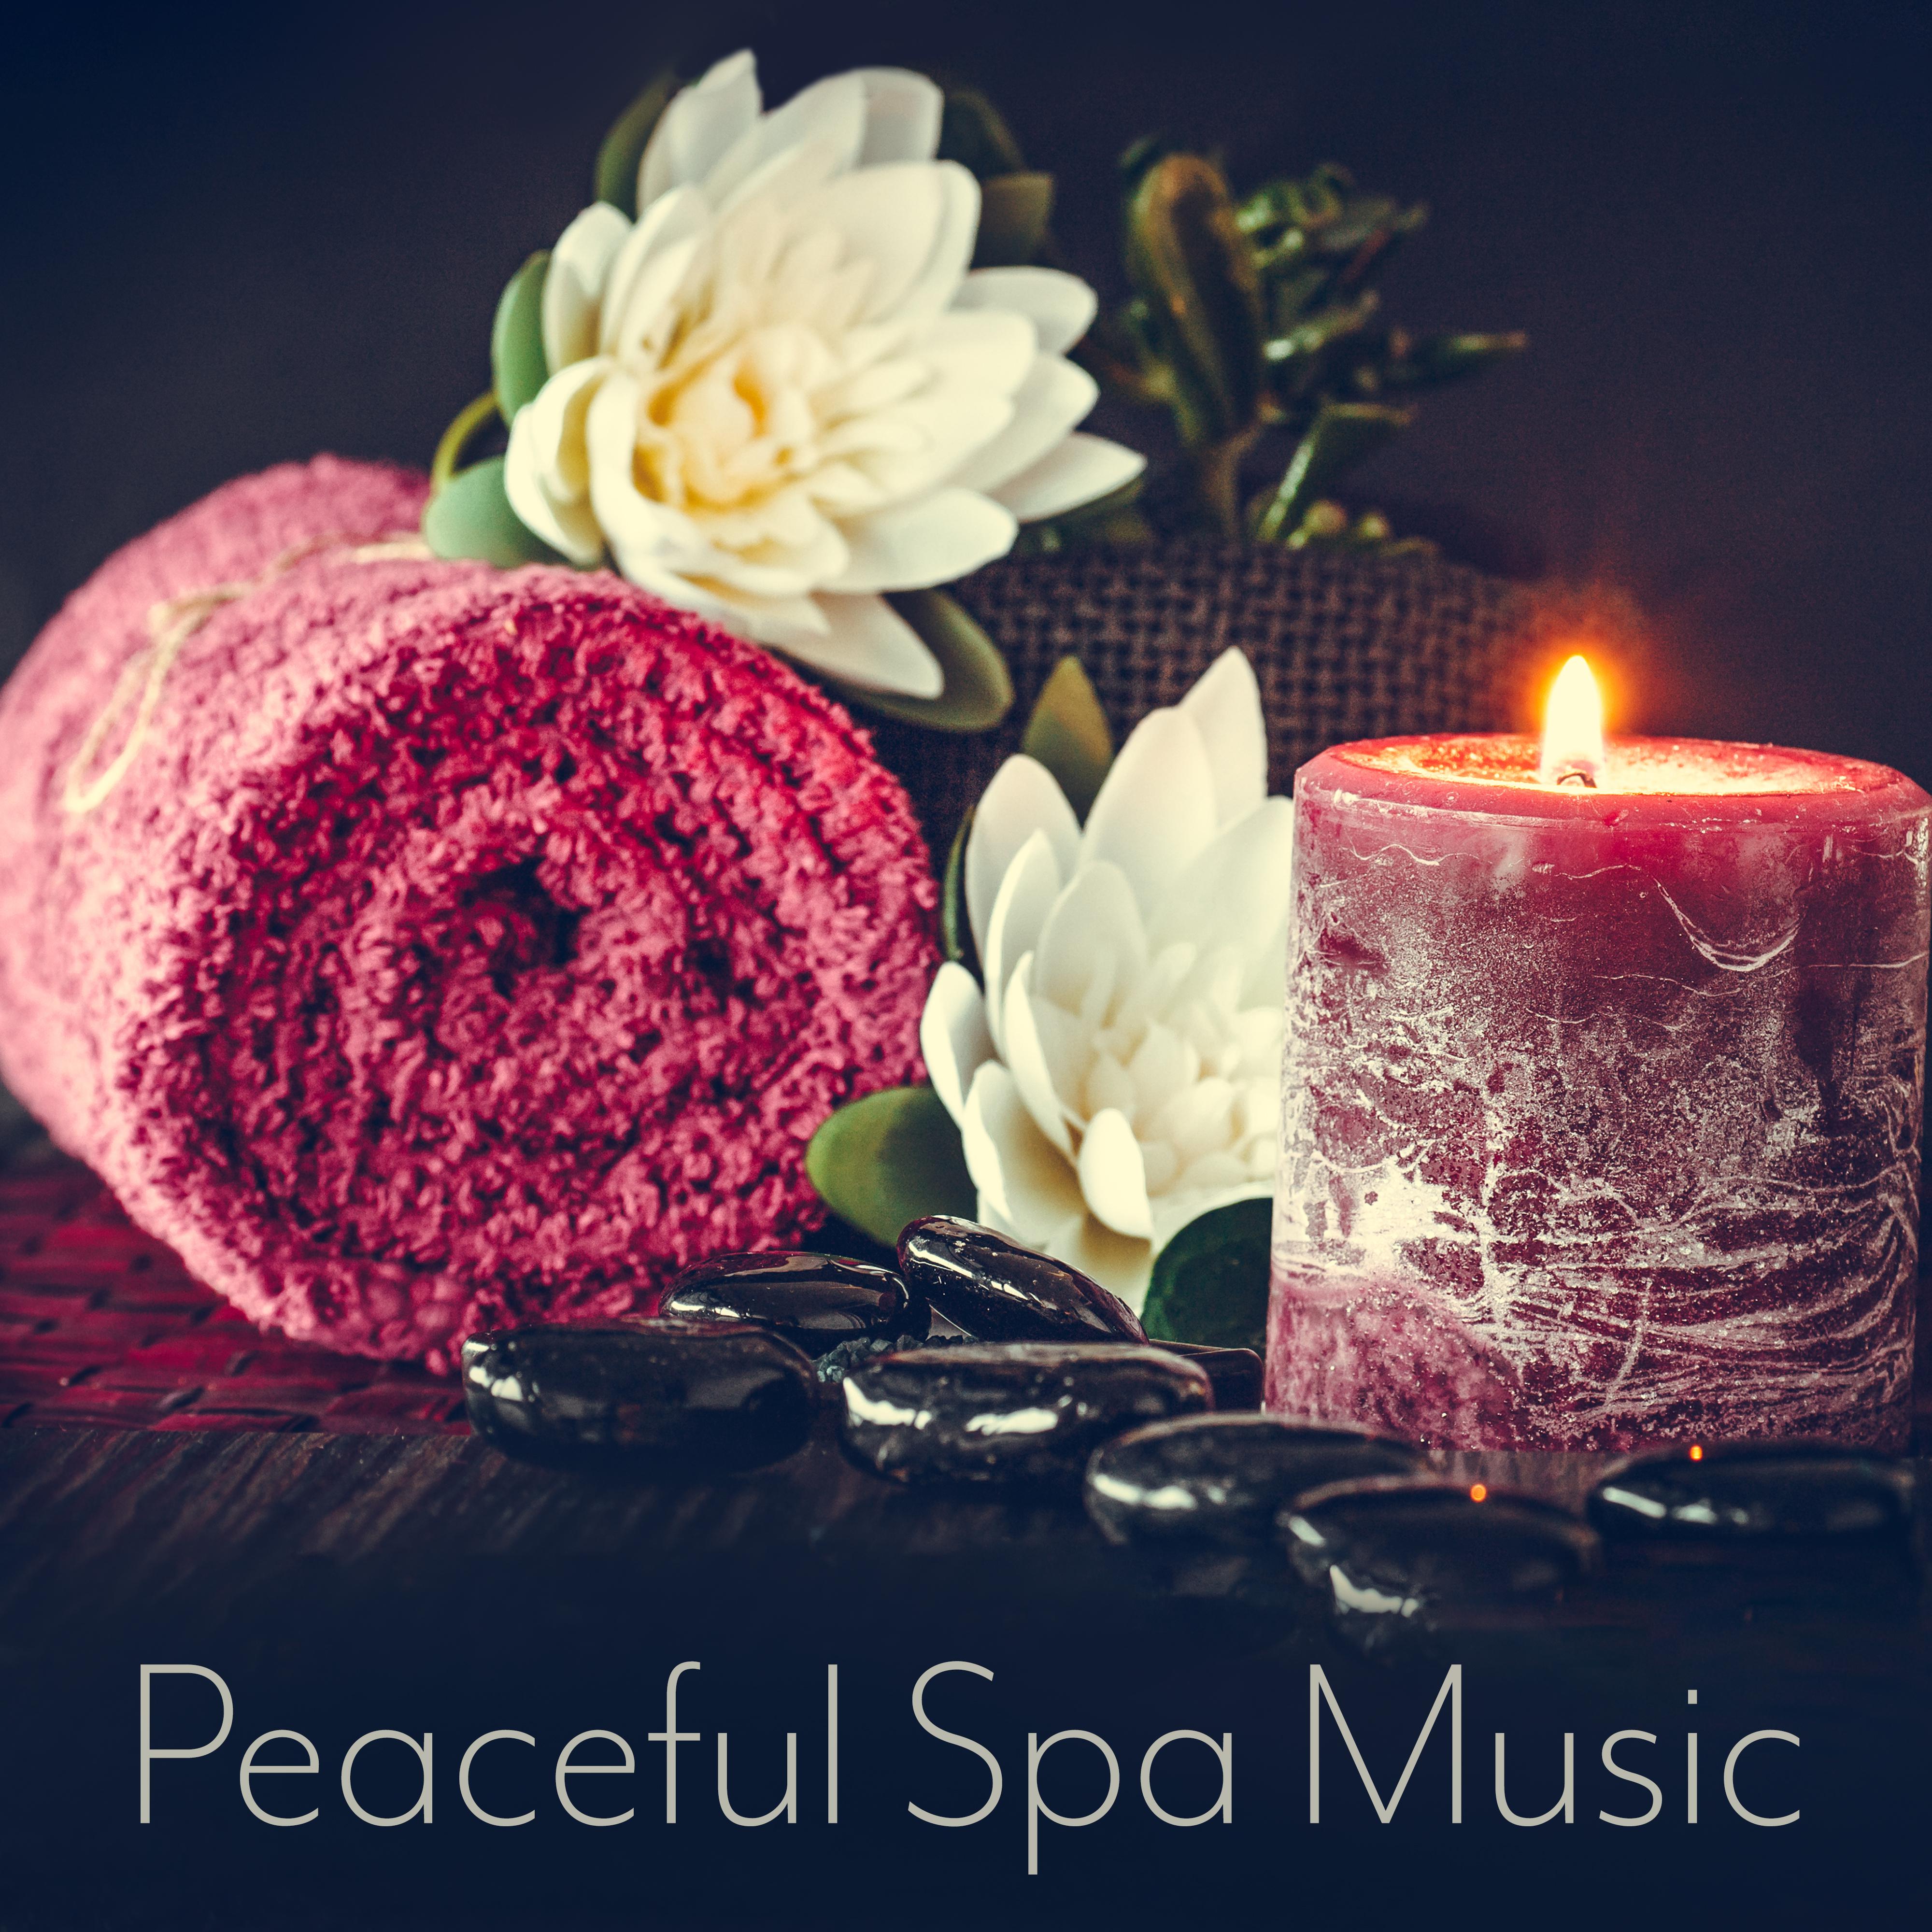 Peaceful Spa Music - Restful Melodies to Calm Down, Relax, Therapy and Massage, Stress Relieving and Tension Music, Musical Set for Massage and Spa